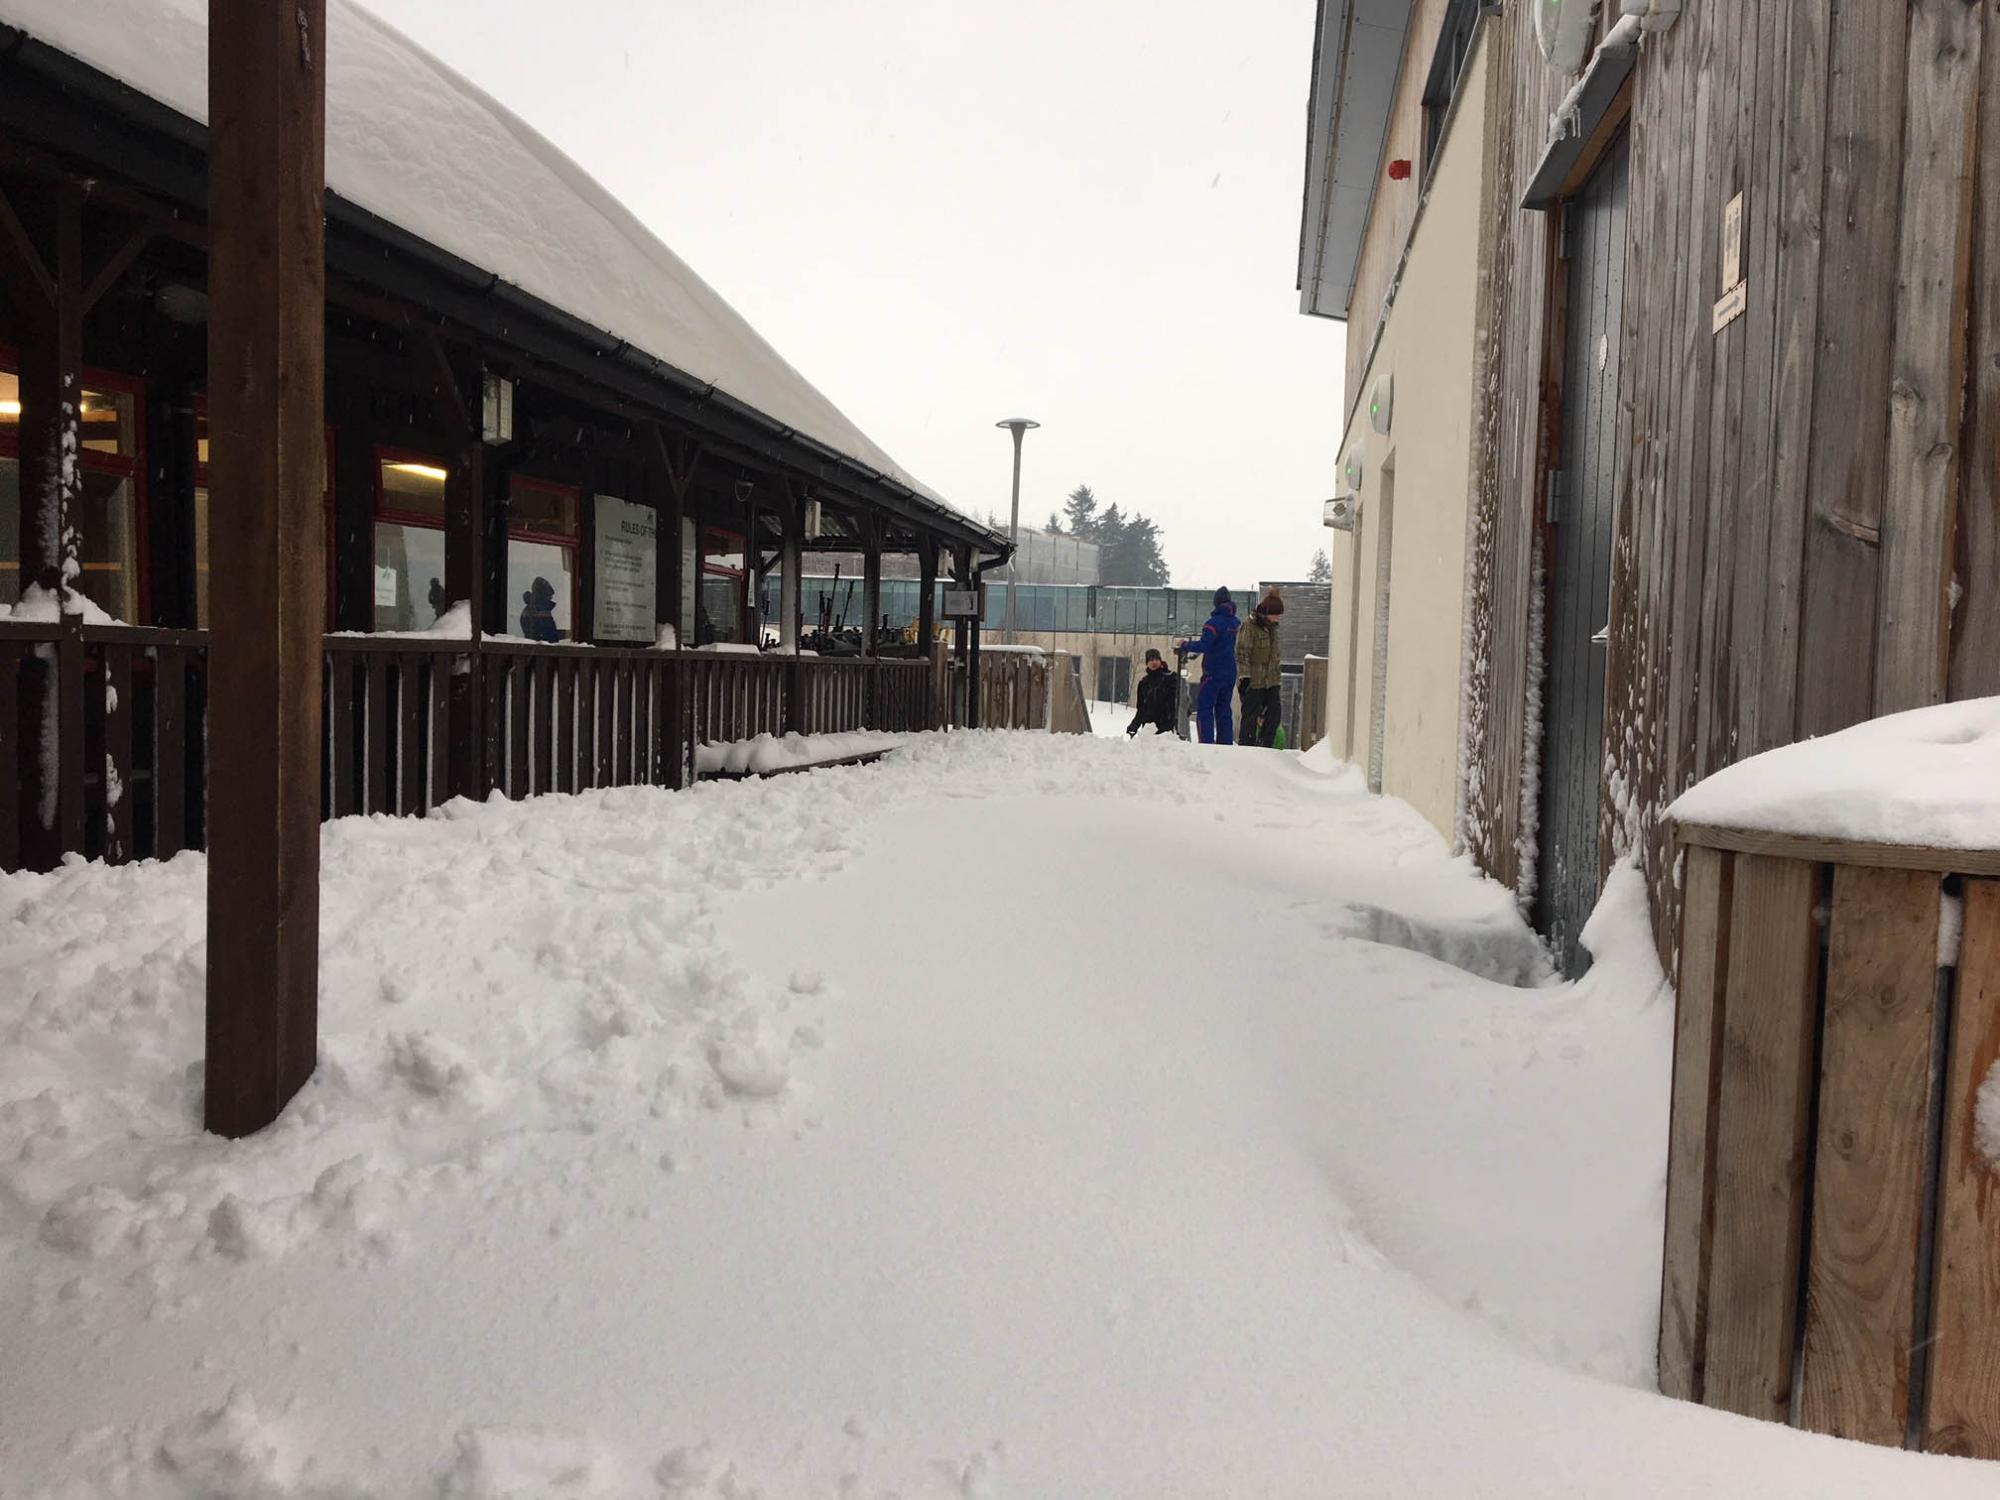 Lots of snow around the club house